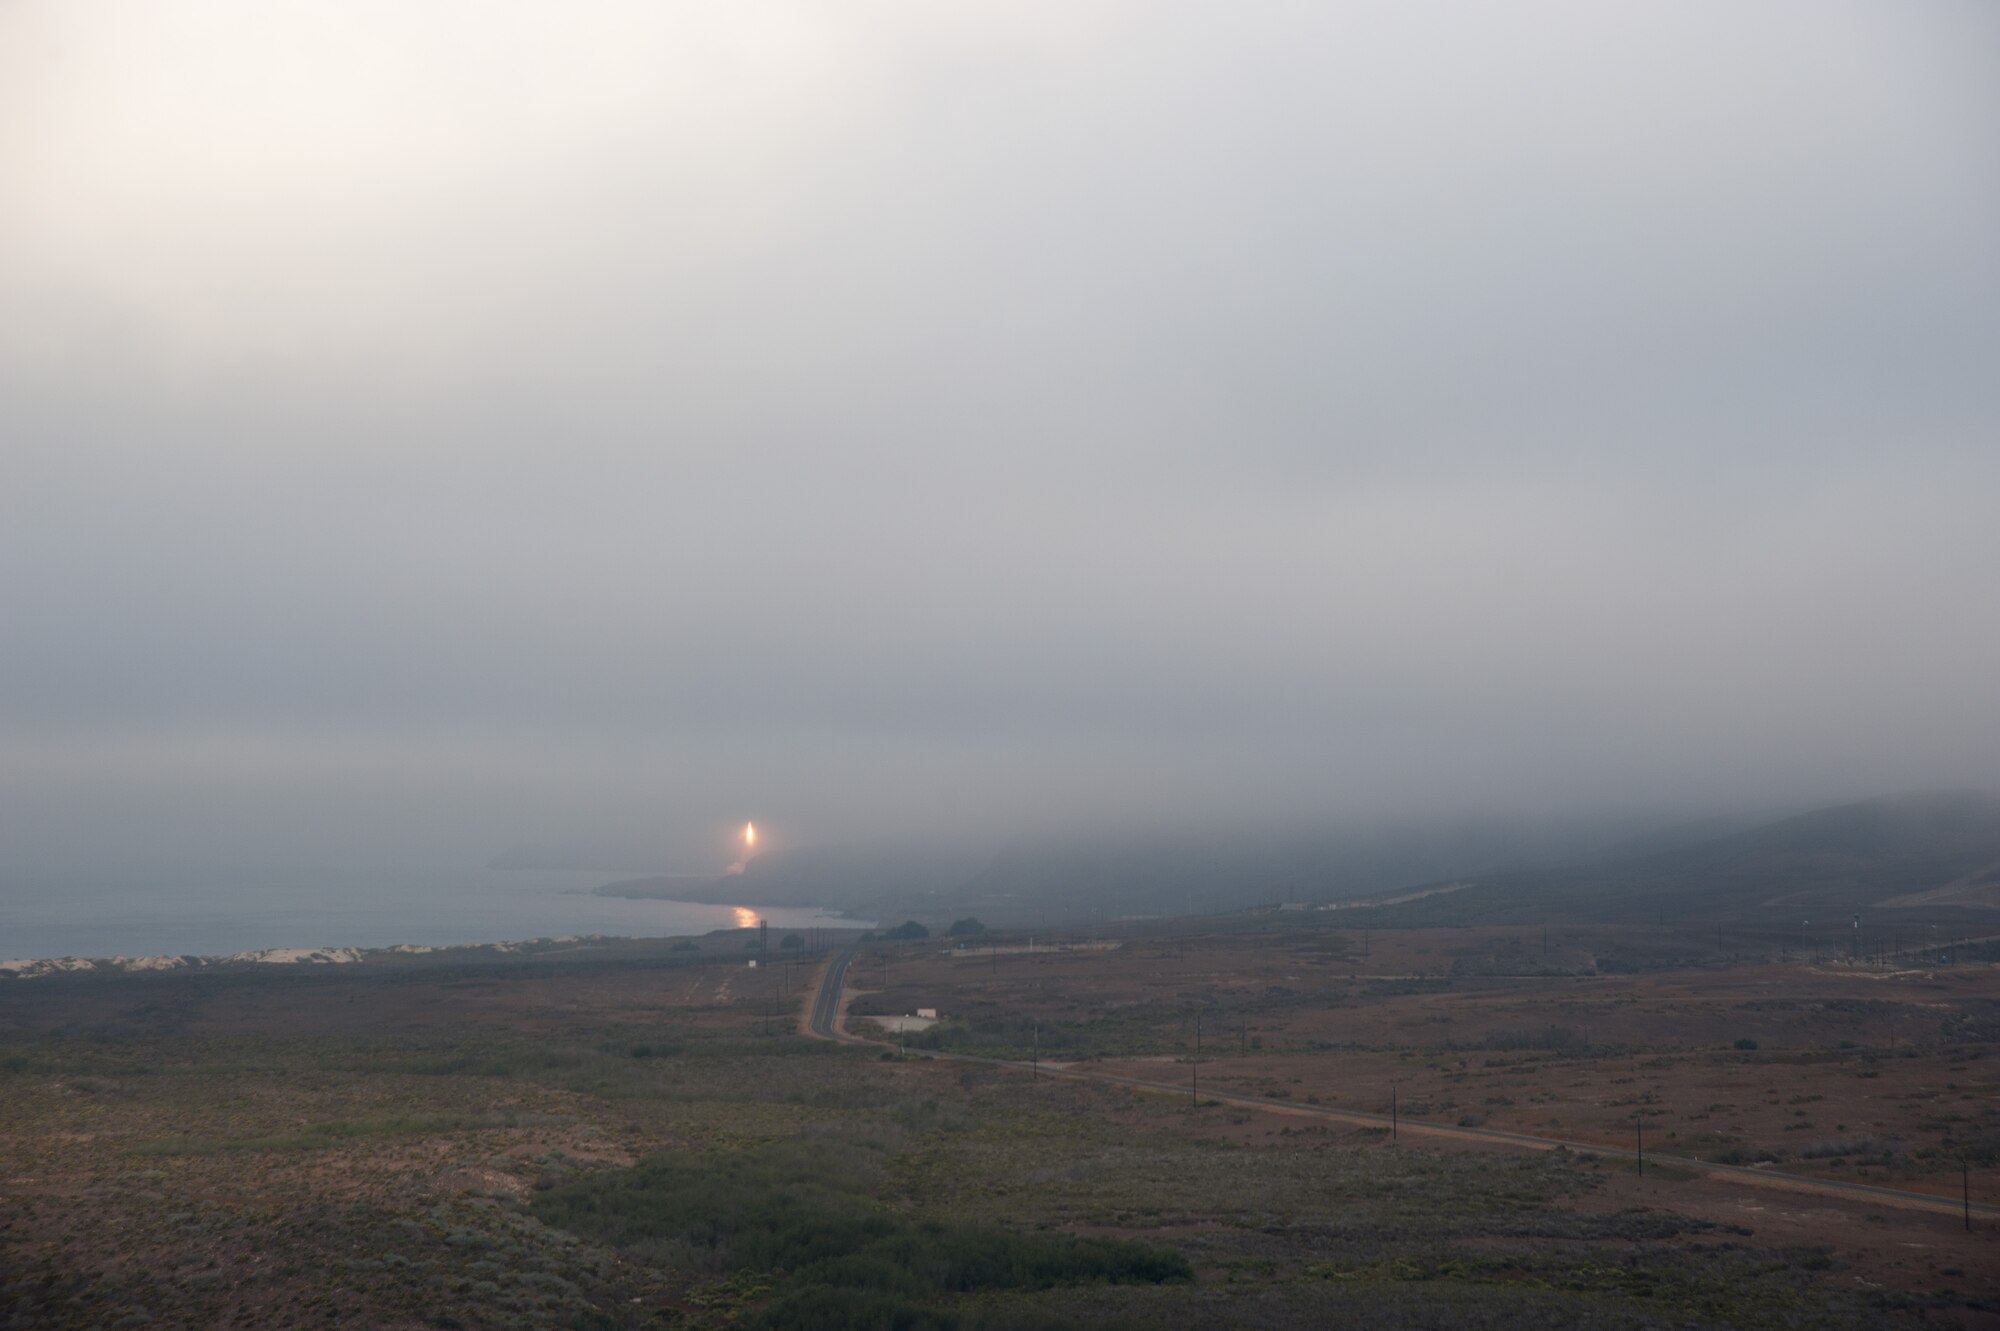 An unarmed Minuteman III intercontinental ballistic missile launches during an operational test at Vandenberg Air Force Base, Sep. 23, 2014, at 7:45 a.m. Col. Keith Balts, 30th Space Wing commander, was the launch decision authority. (U.S. Air Force Photo by Michael Peterson)